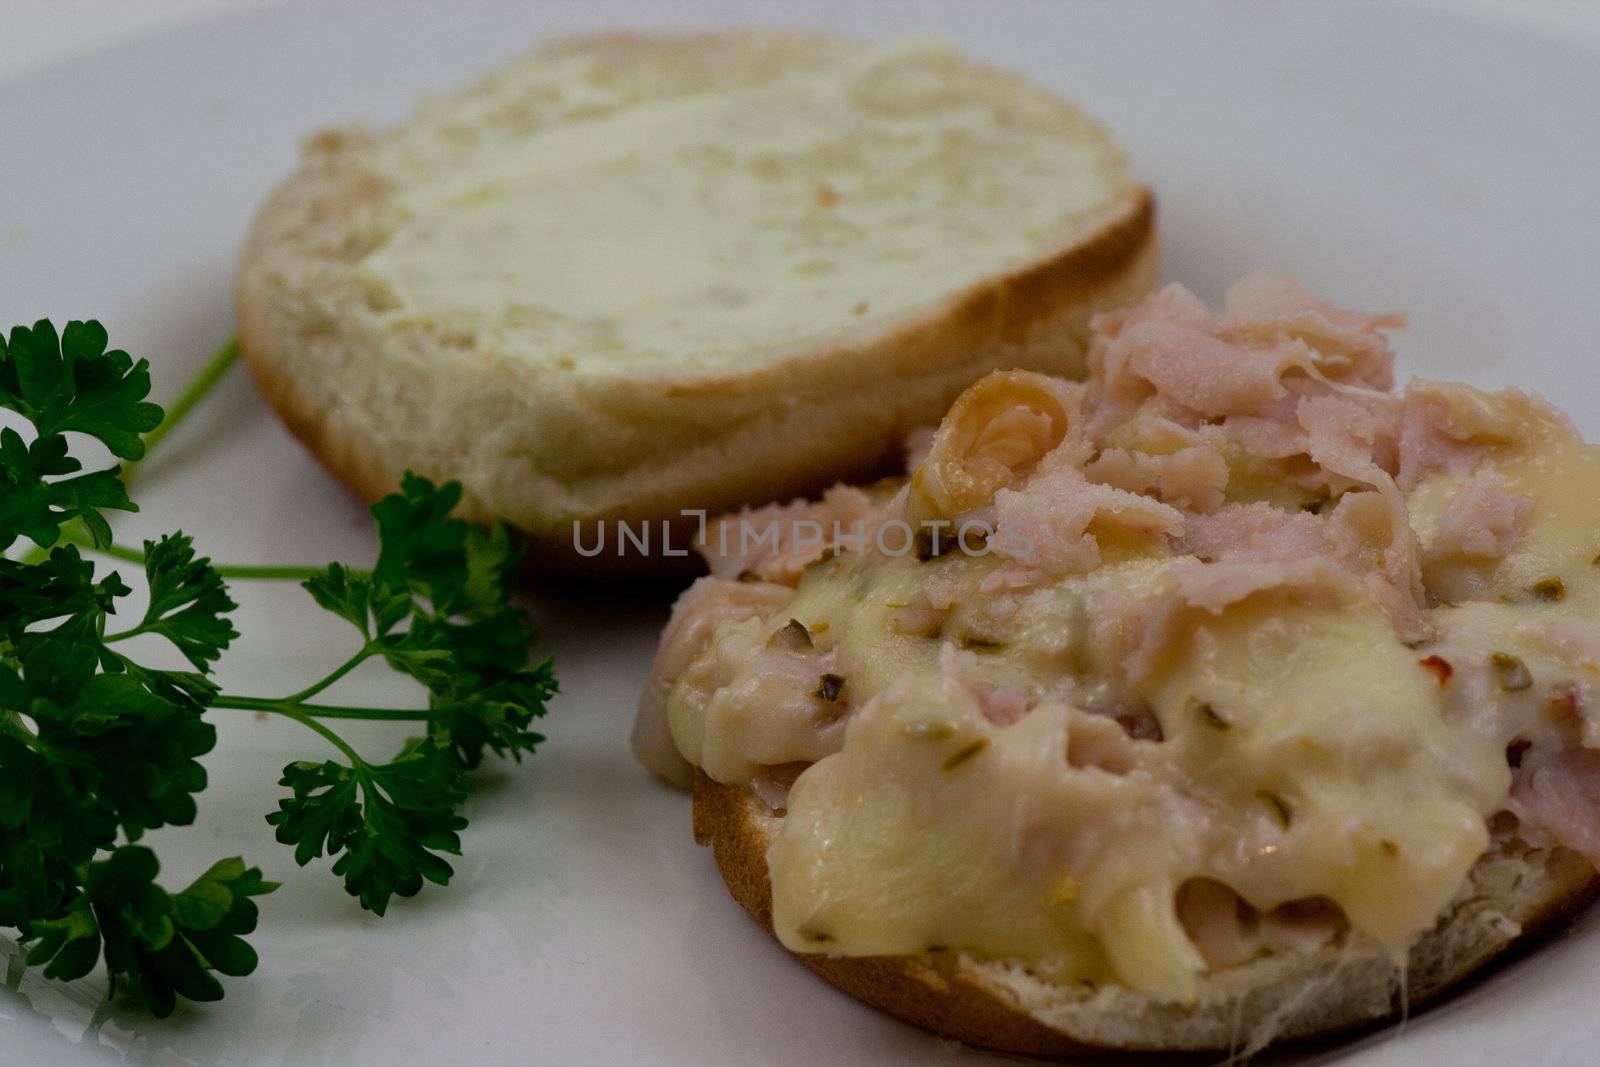 Croped viewof an Open faced chicken sandwich on a bunn with a sprig of parsely.